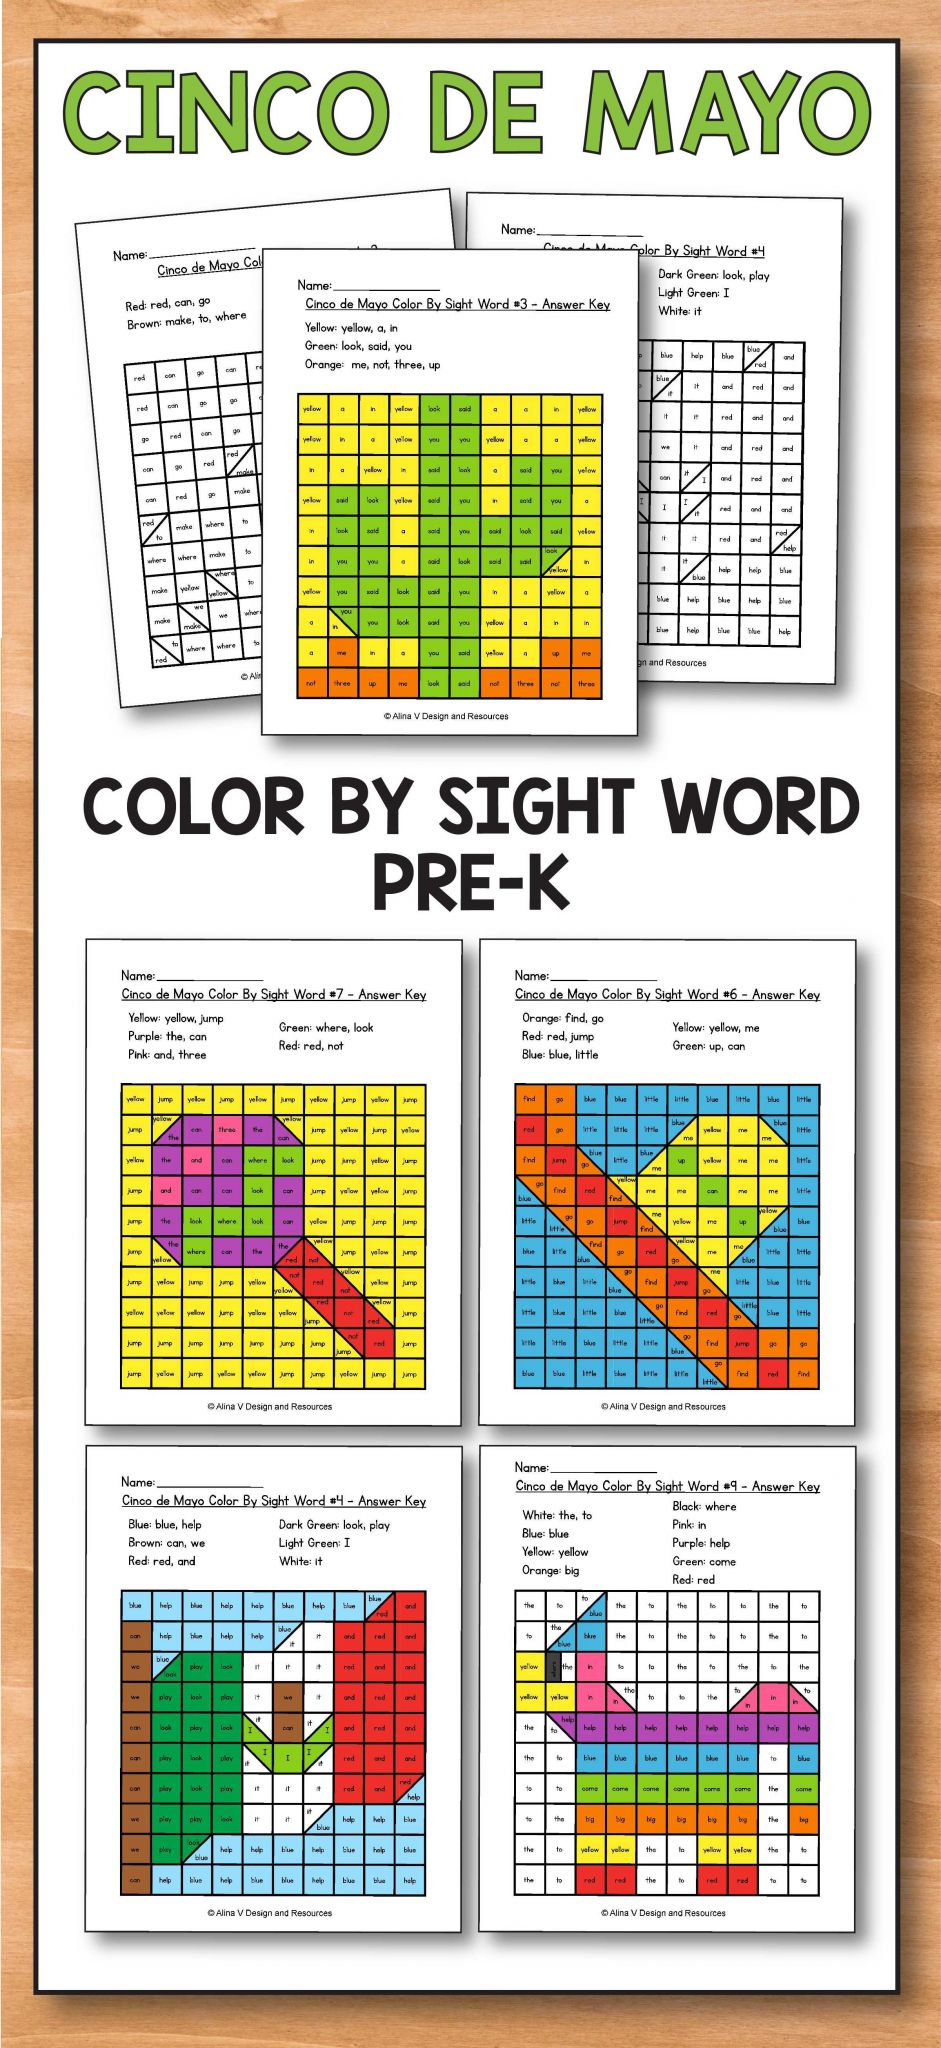 Winter Worksheets for Preschoolers as Well as Cinco De Mayo Activities for Preschool Cinco De Mayo Coloring